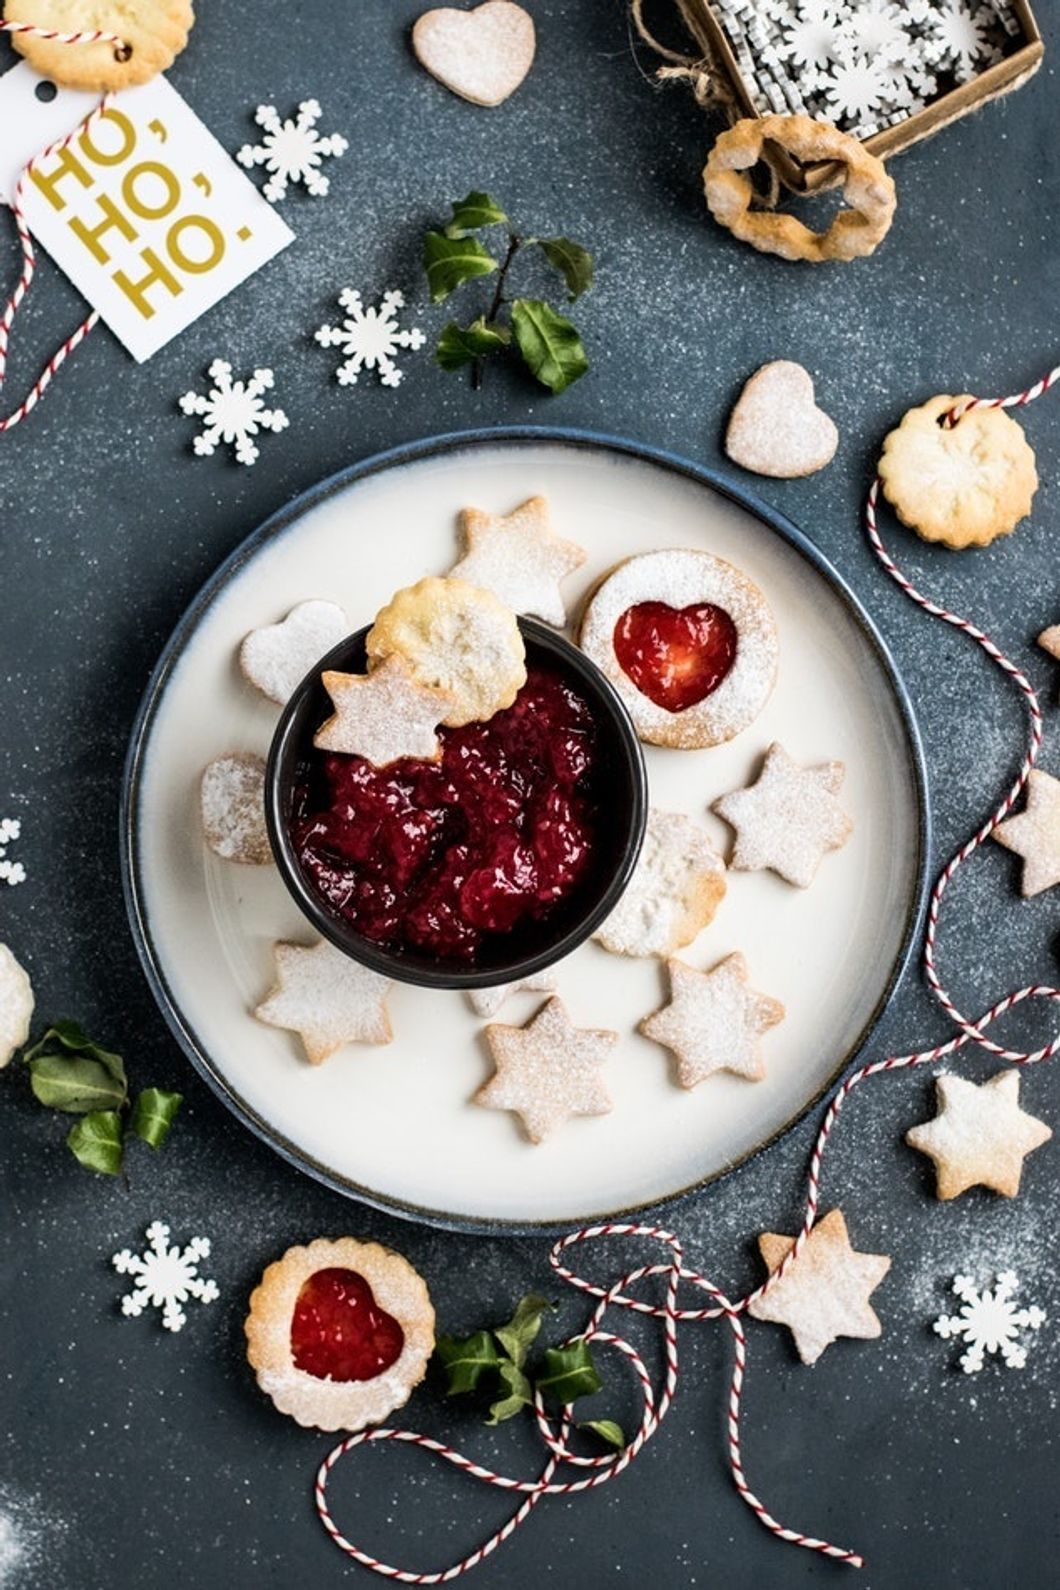 10 Best Holiday Foods To Make For Your Christmas Parties